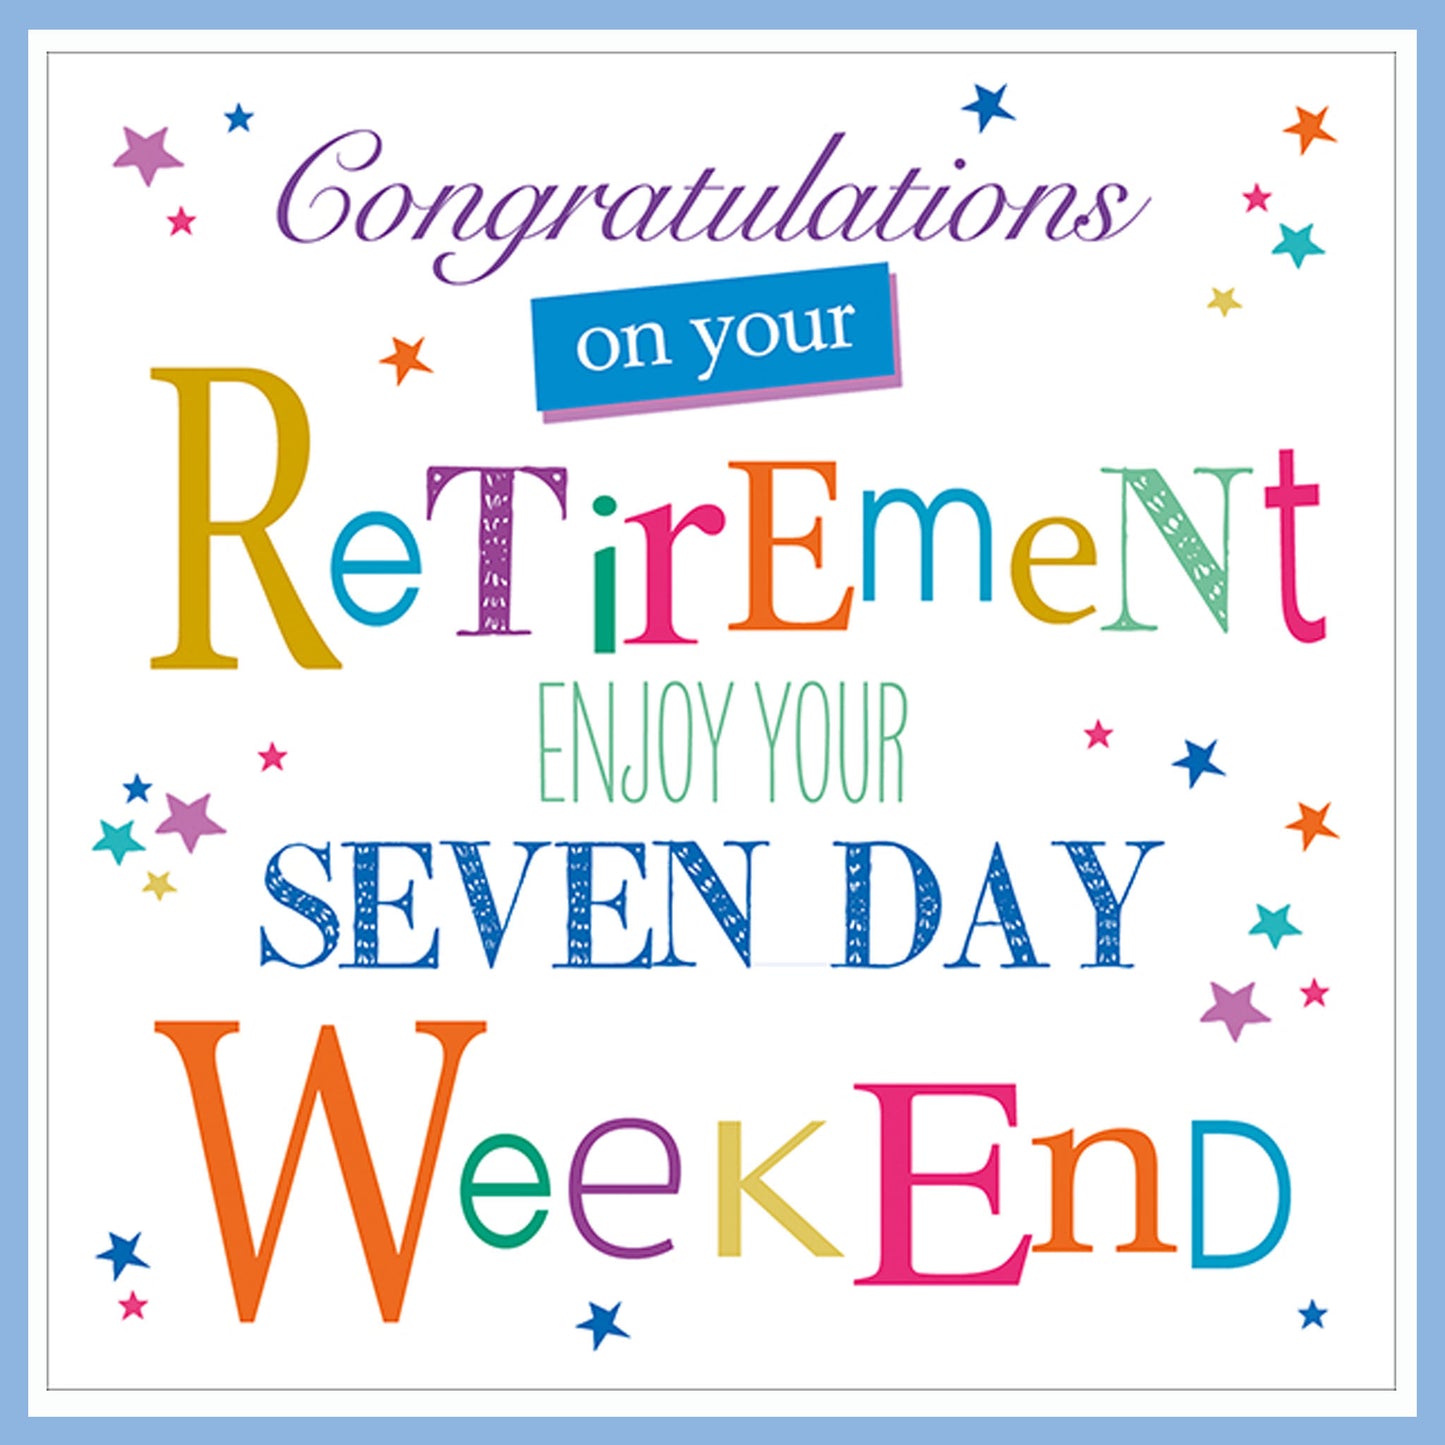 7 Day Weekend Retirement Card